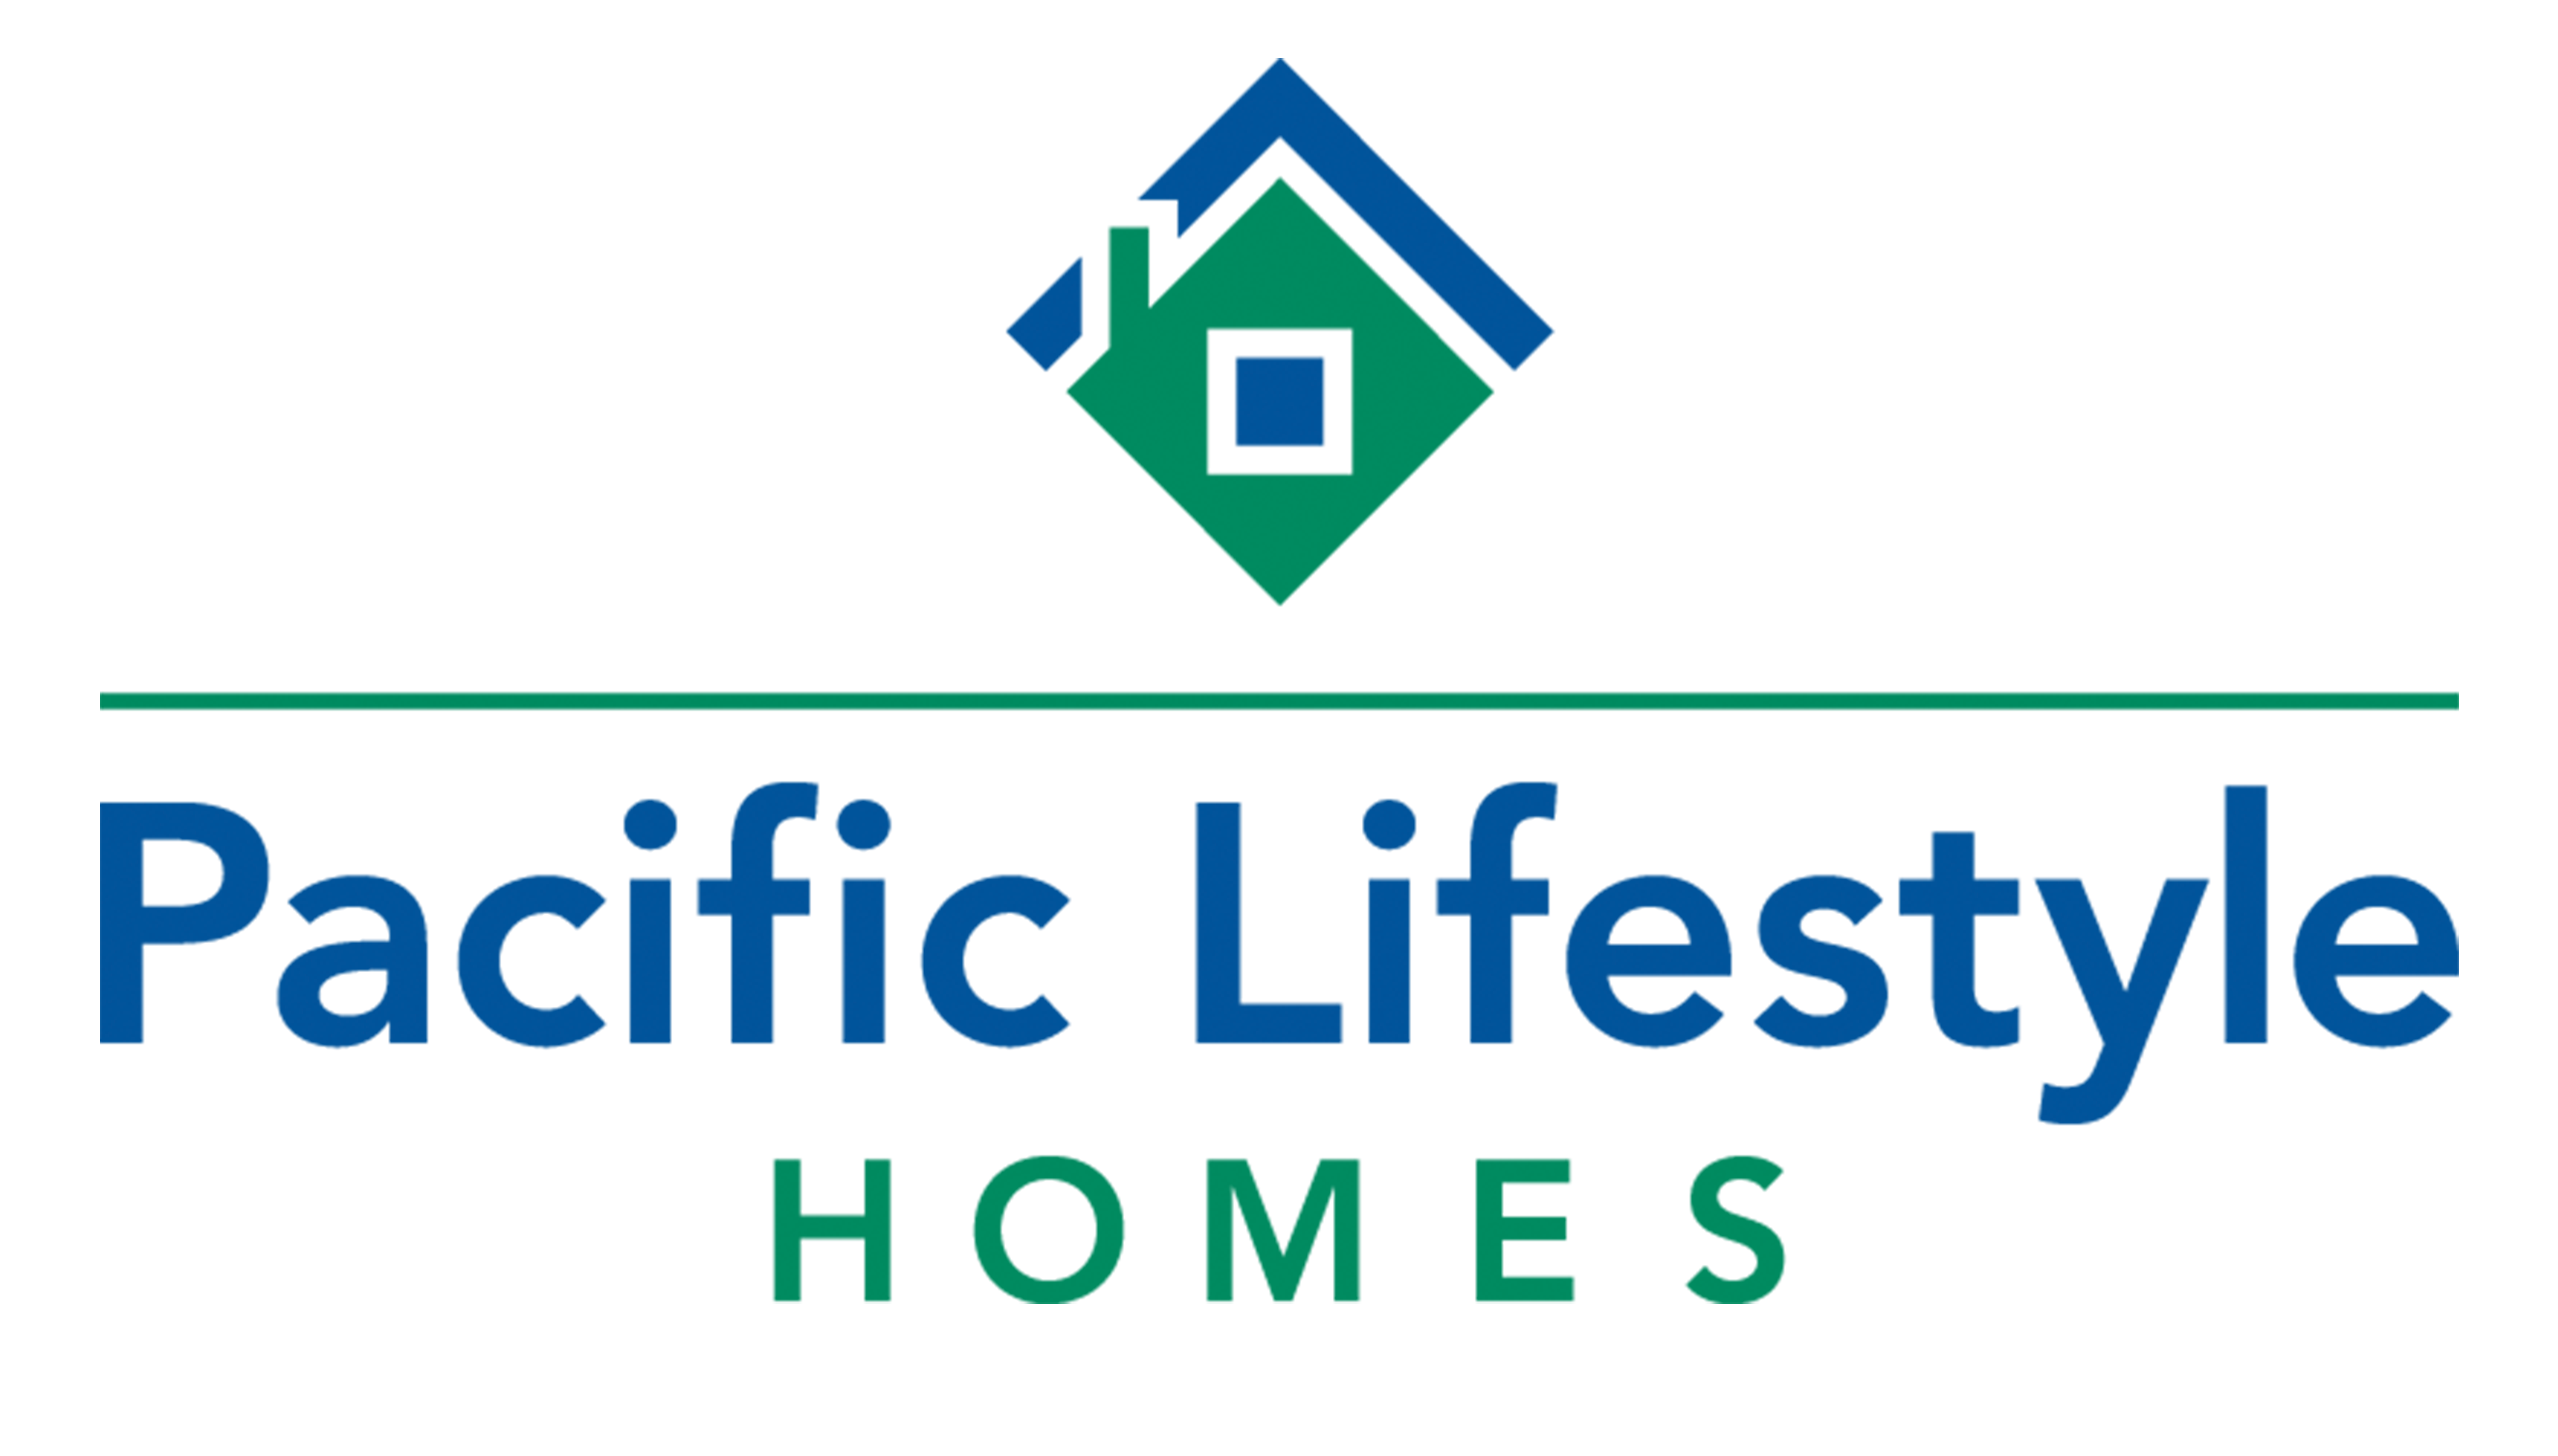 Pacific Lifestyle Homes, Windermere Foundation, Windermere Stellar